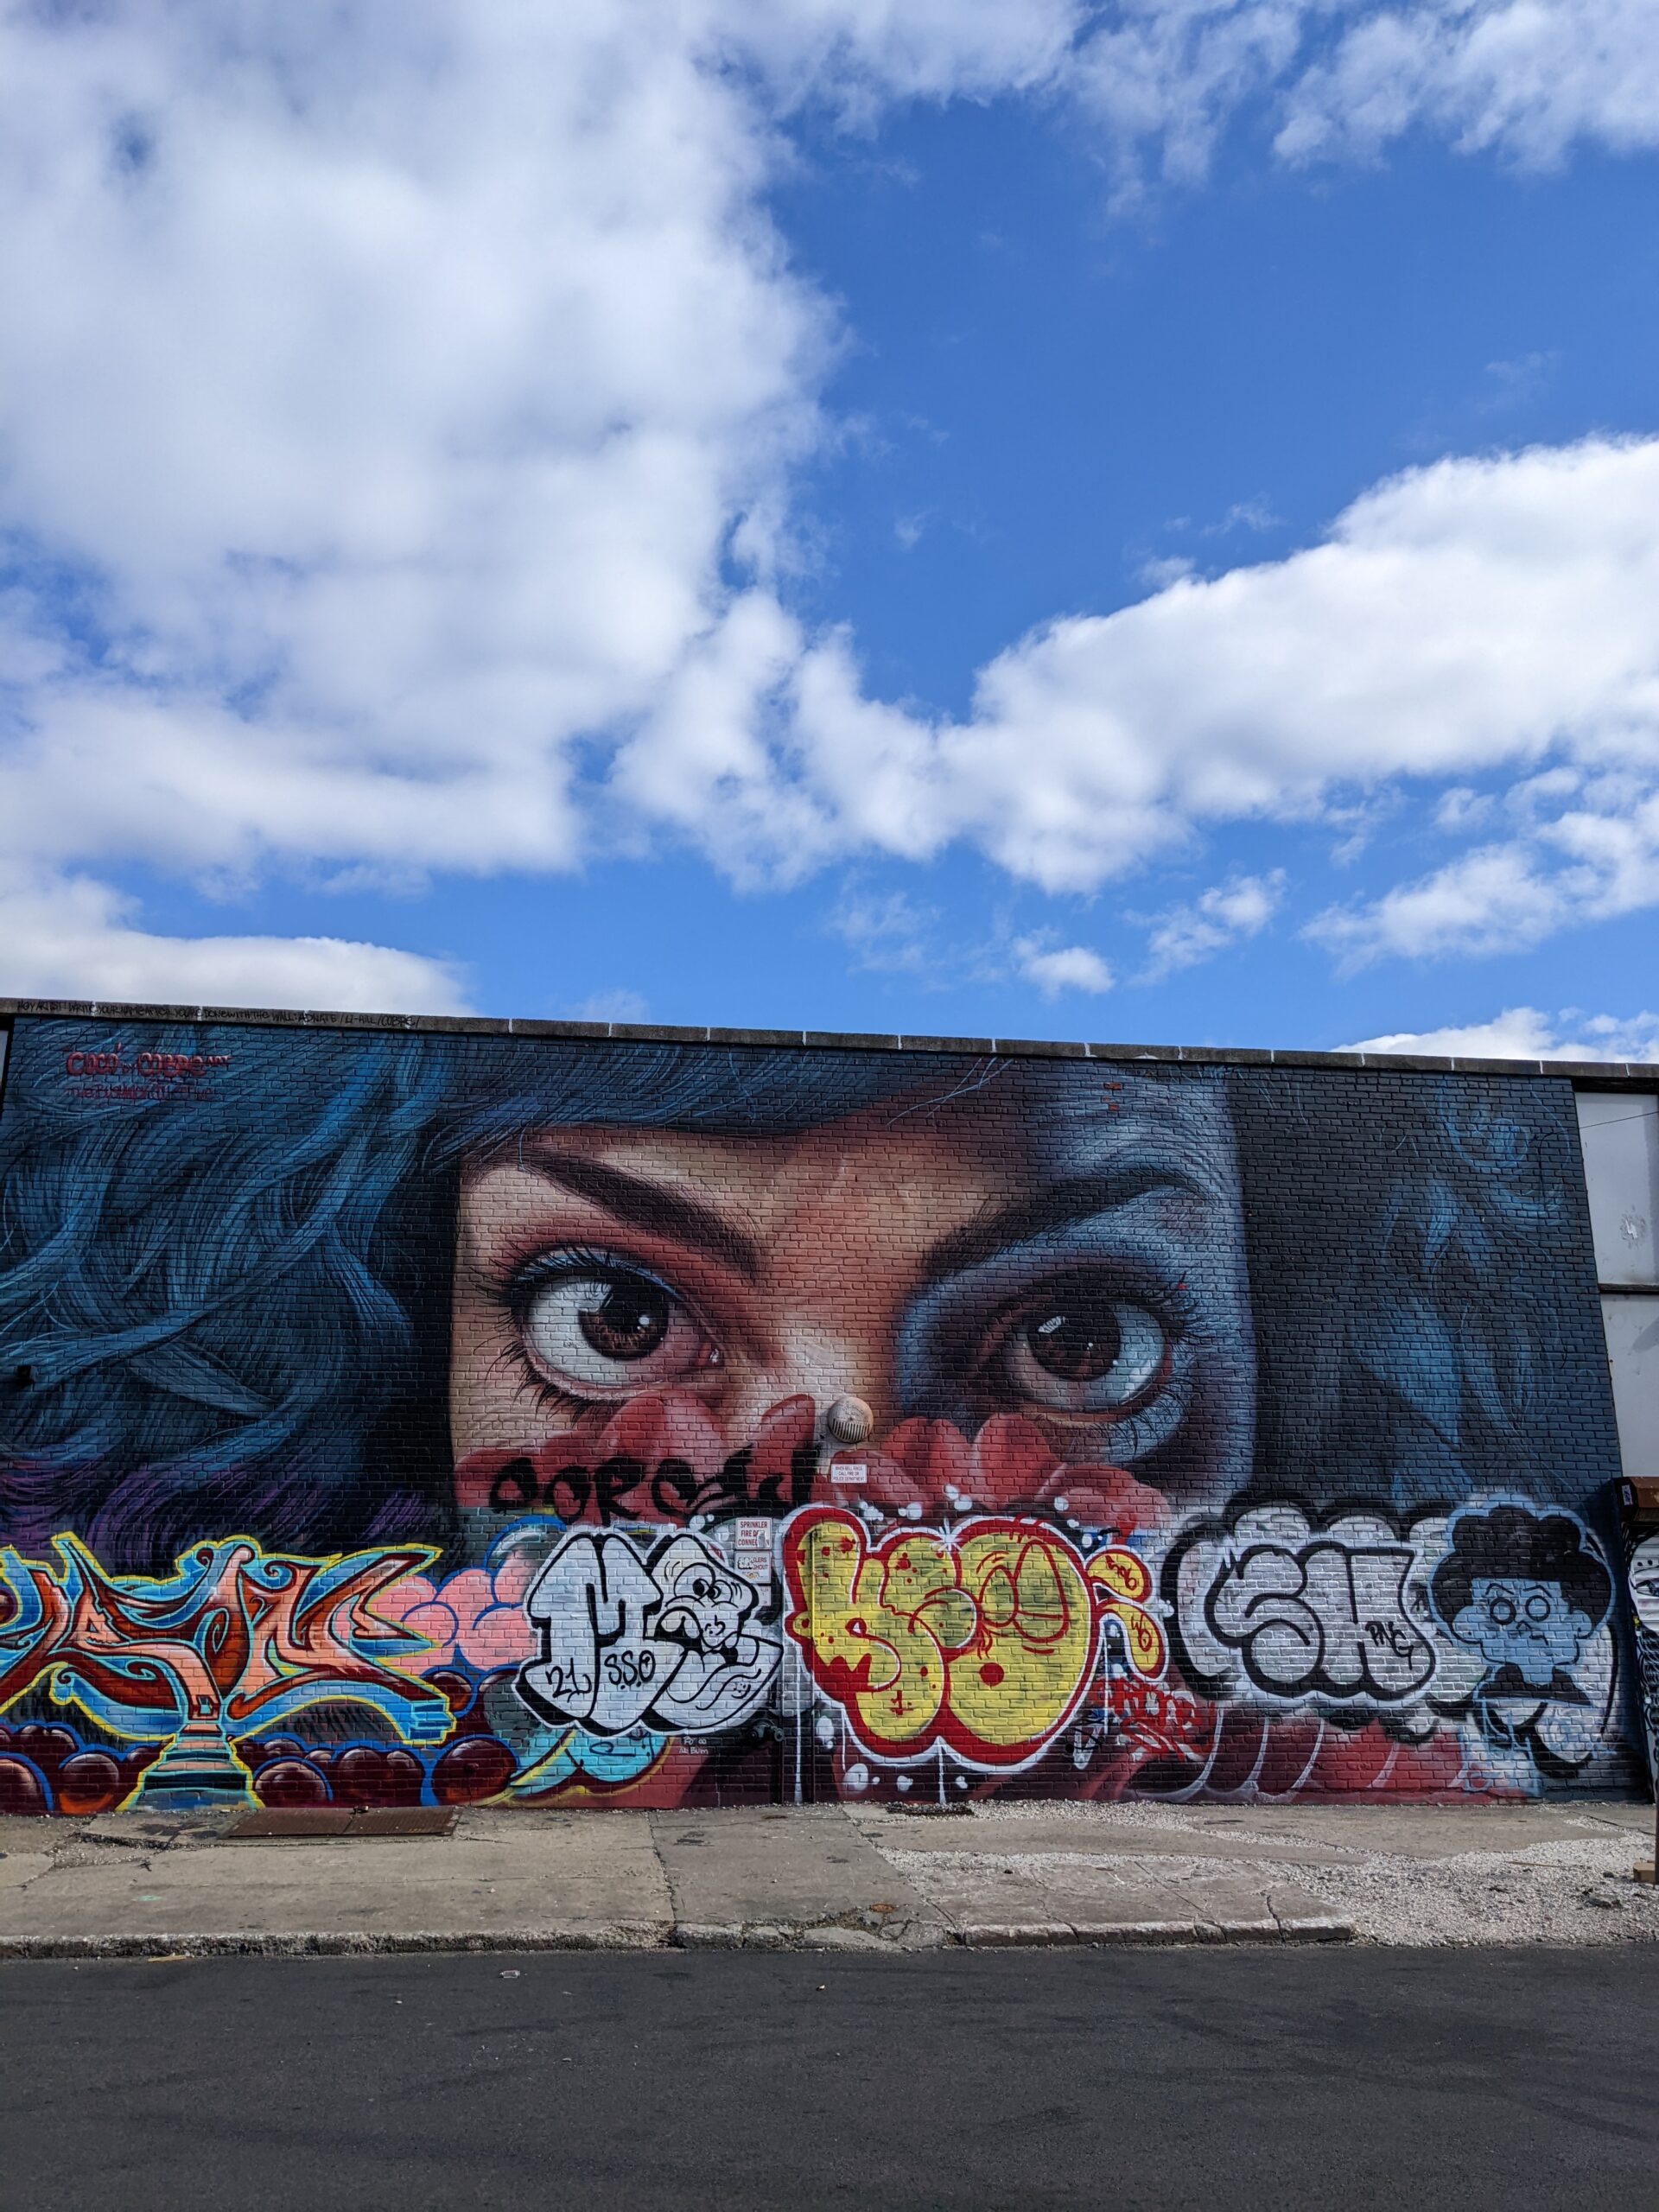 a mural of a woman's face on a 1 story building, the lower part of it is overpainted with tags